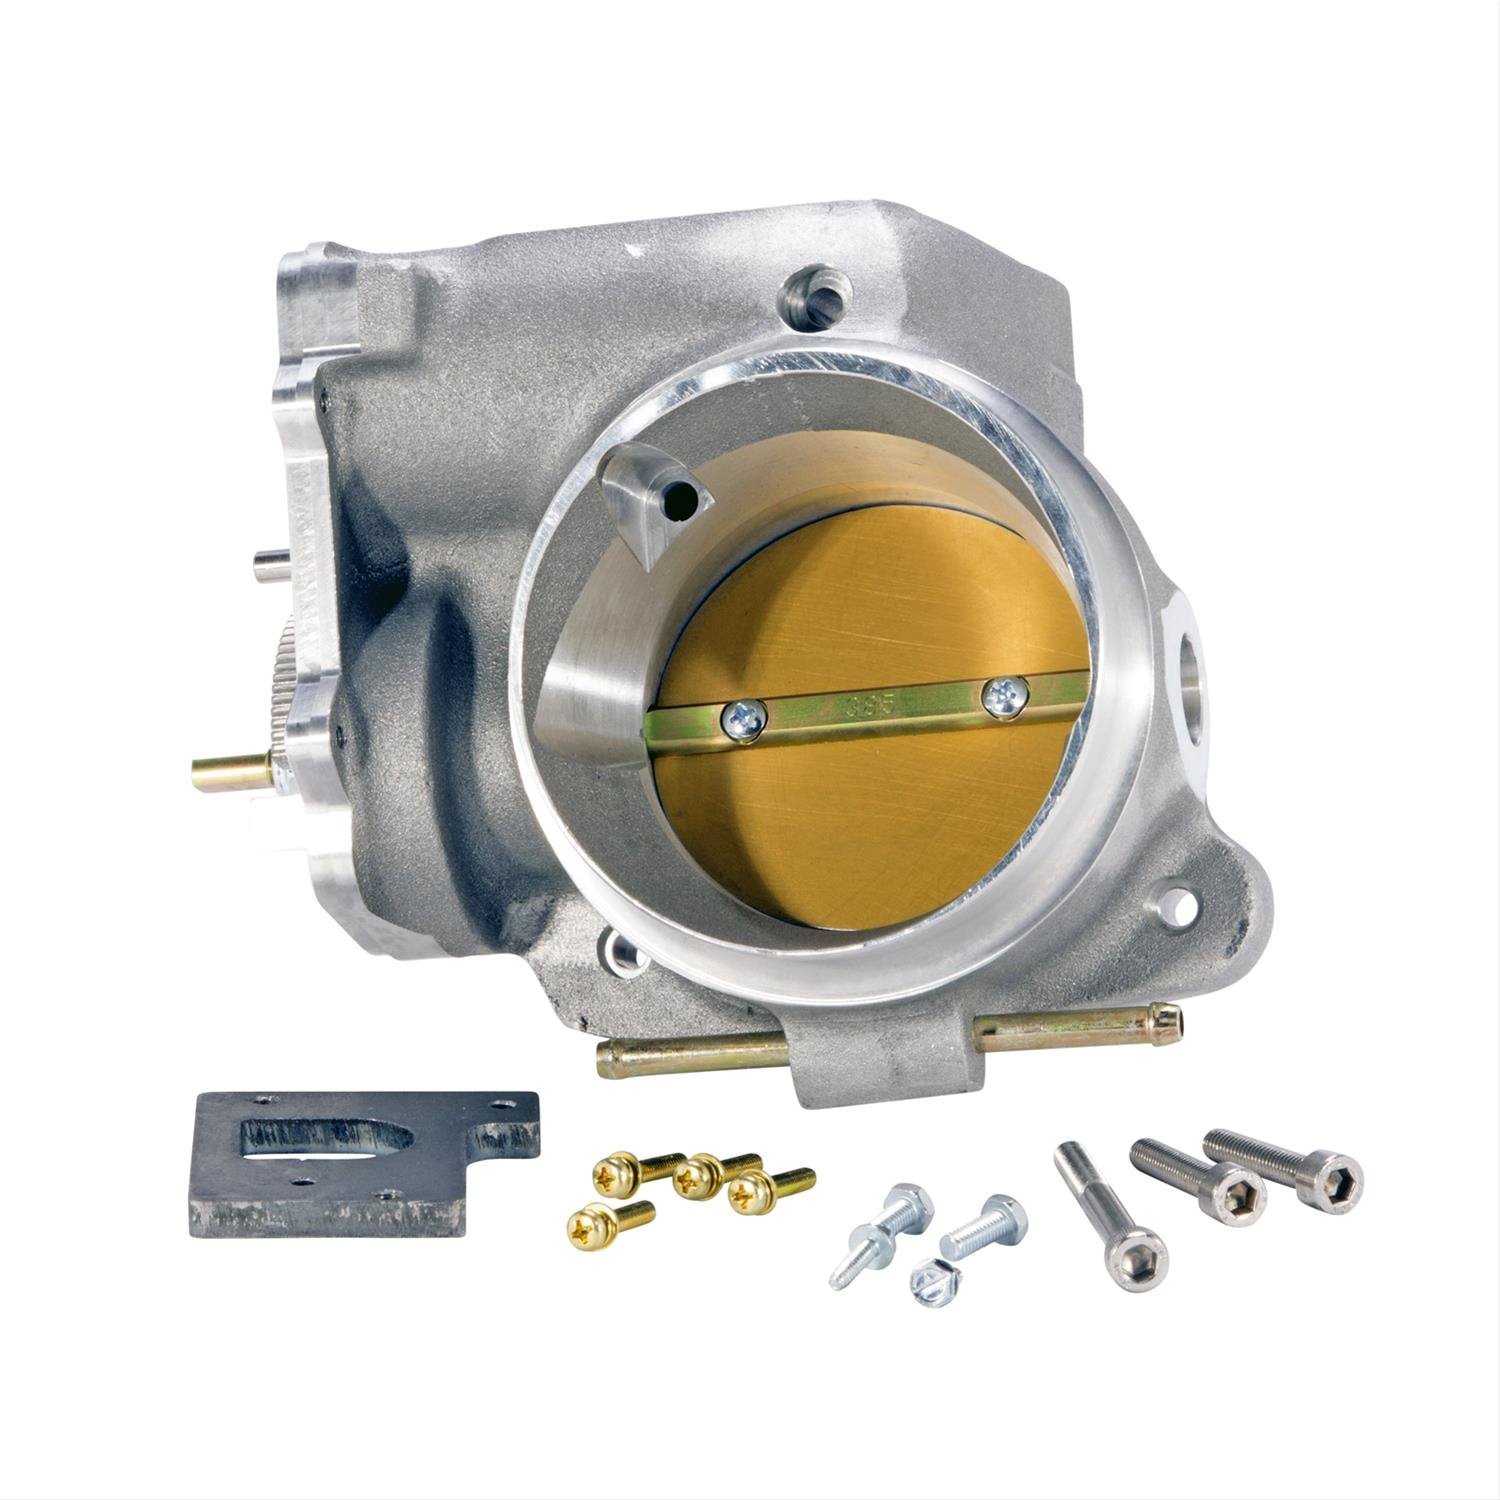 High Flow Power Plus Series for GM 4.8 BBK 1757 80mm Throttle Body 6.0L Truck and Hummer H2 5.3 